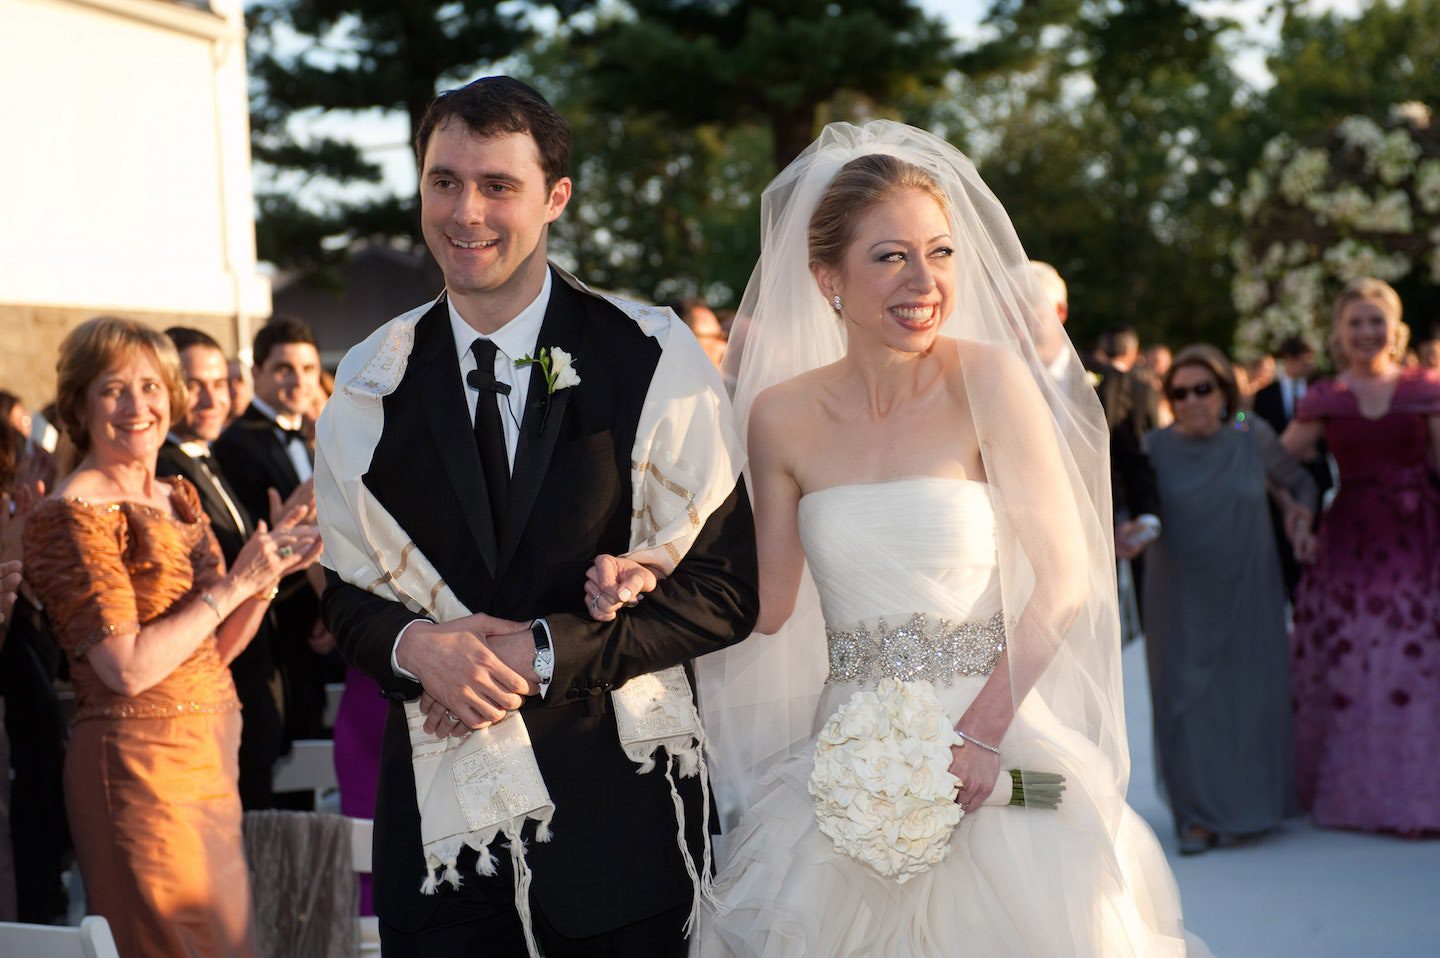 when did chelsea clinton get married.